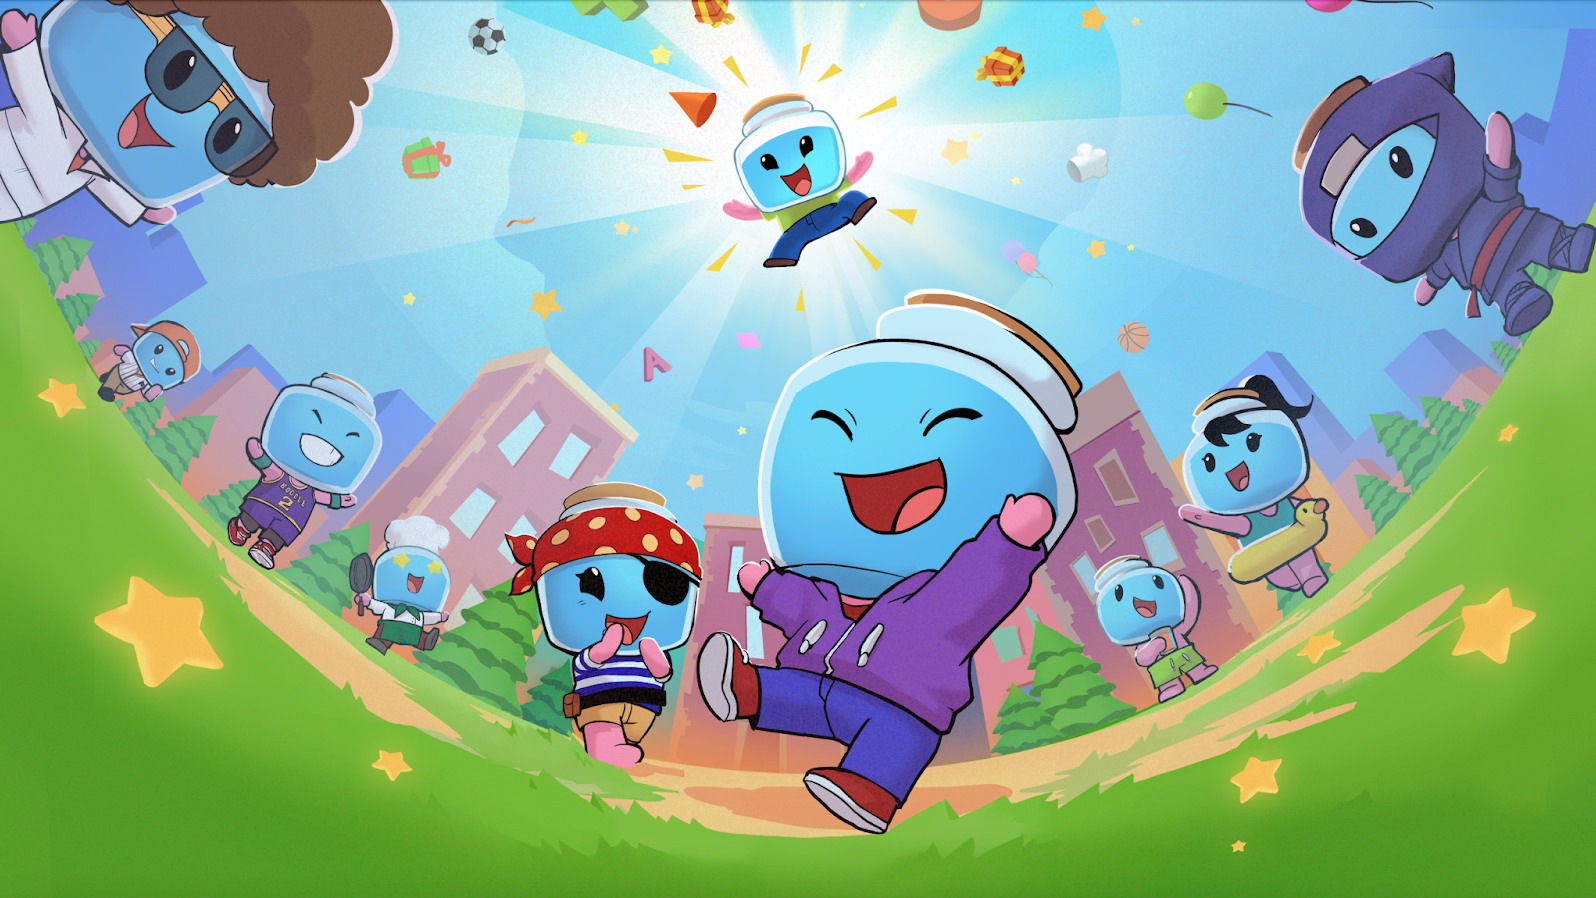 Bottle-headed characters playing in a grassy area